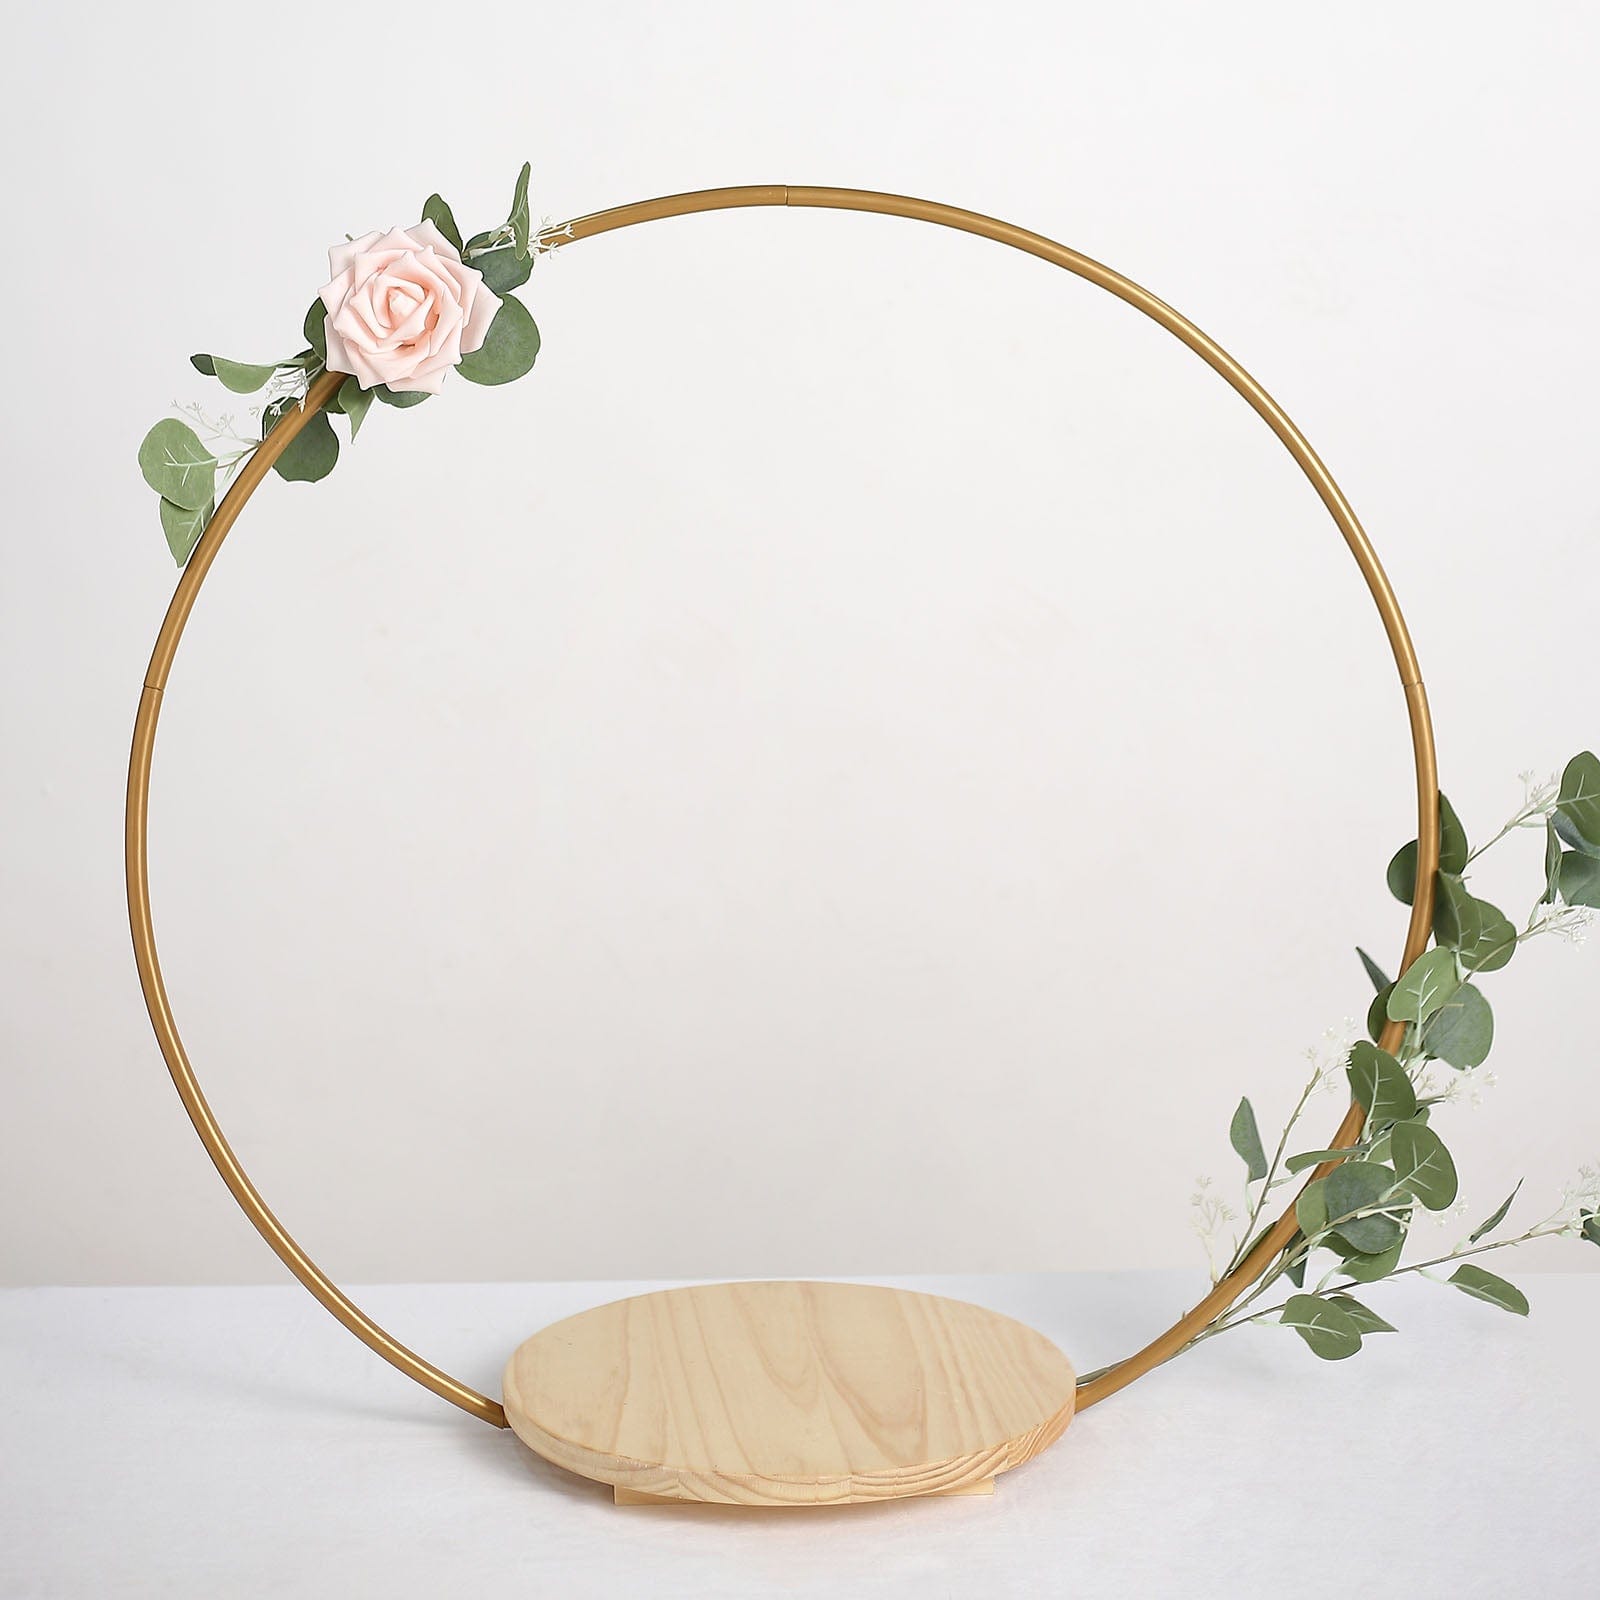 Gold Geometric Round Wood with Metal Arch Cake Display Stand